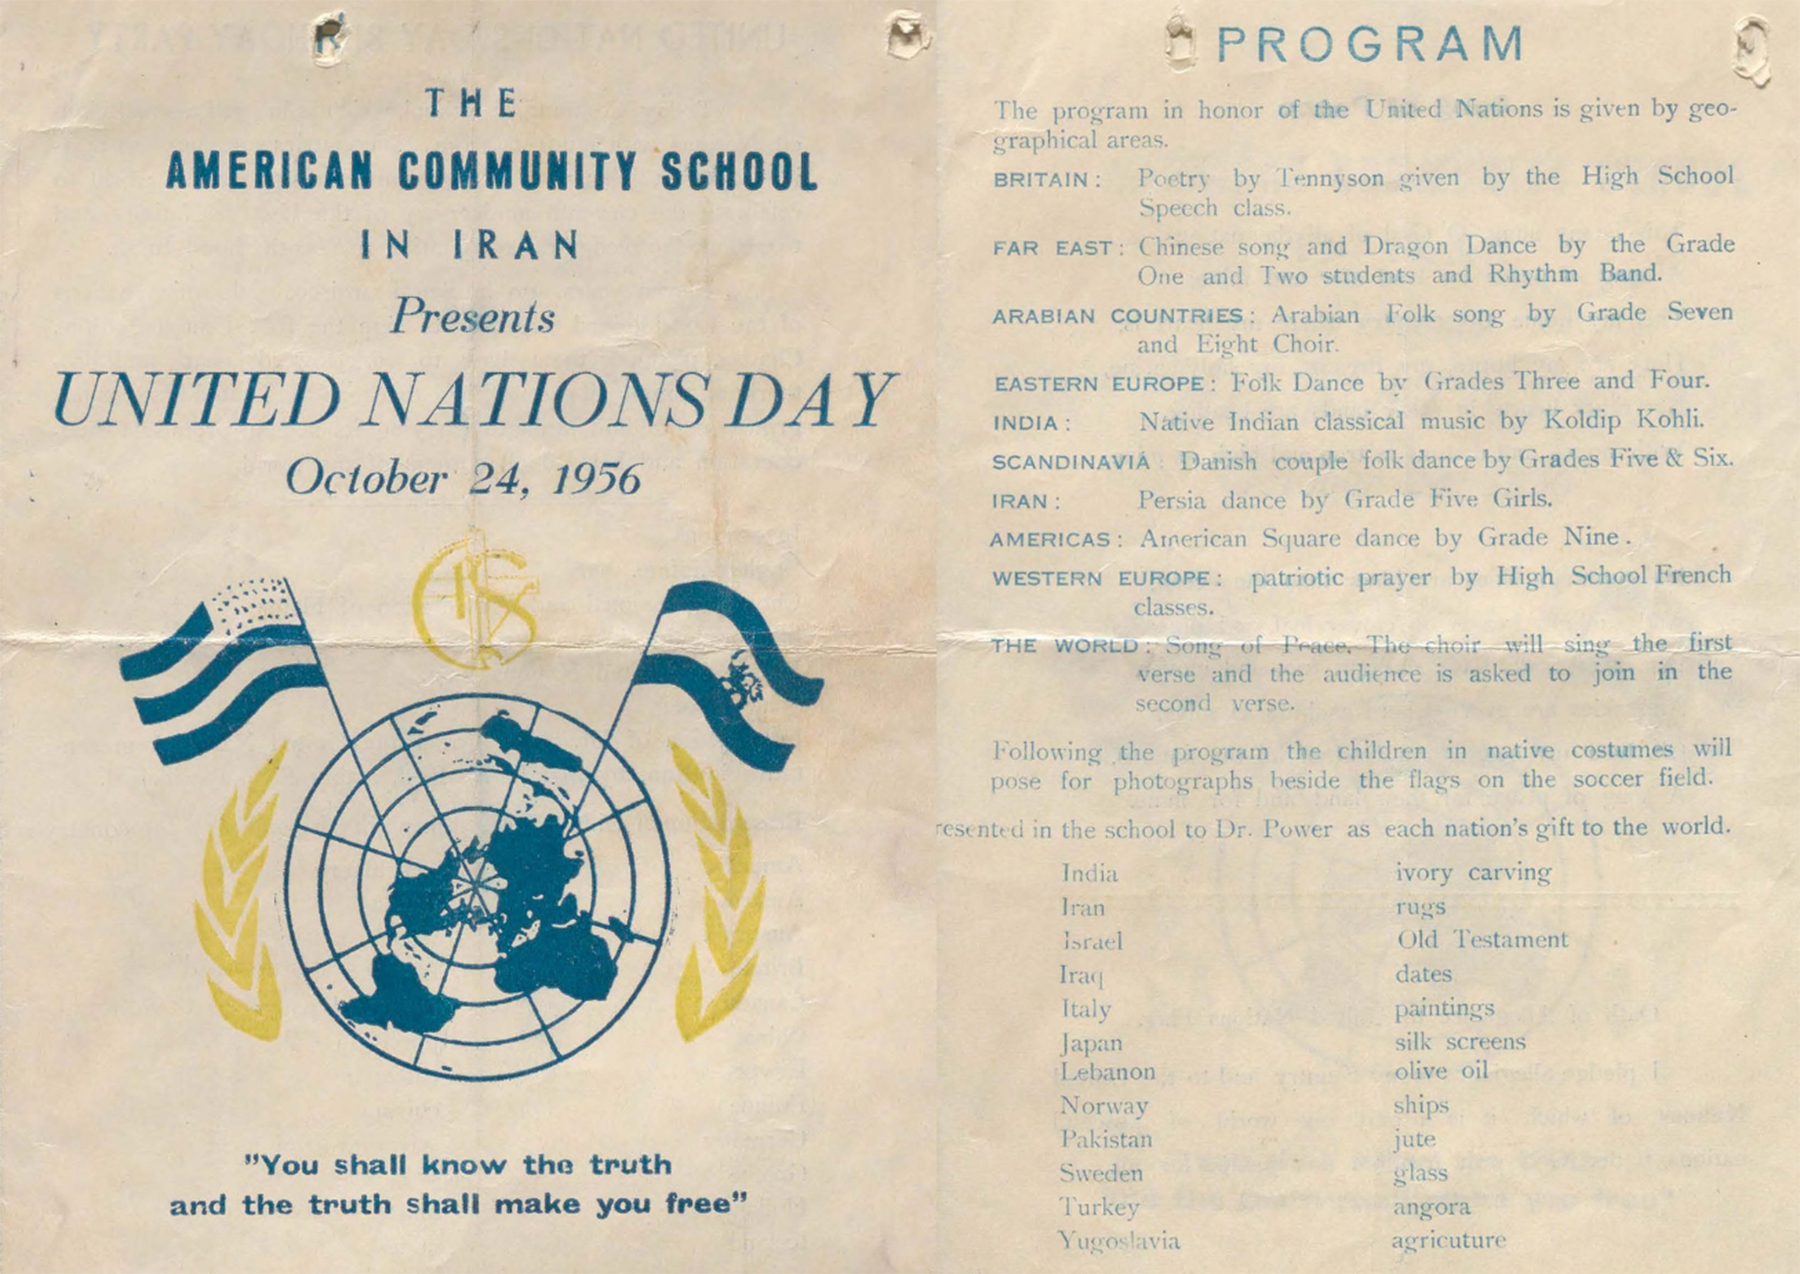 Tehran Community School's program for United Nations Day, October 24, 1956. Pearl ID: 340220